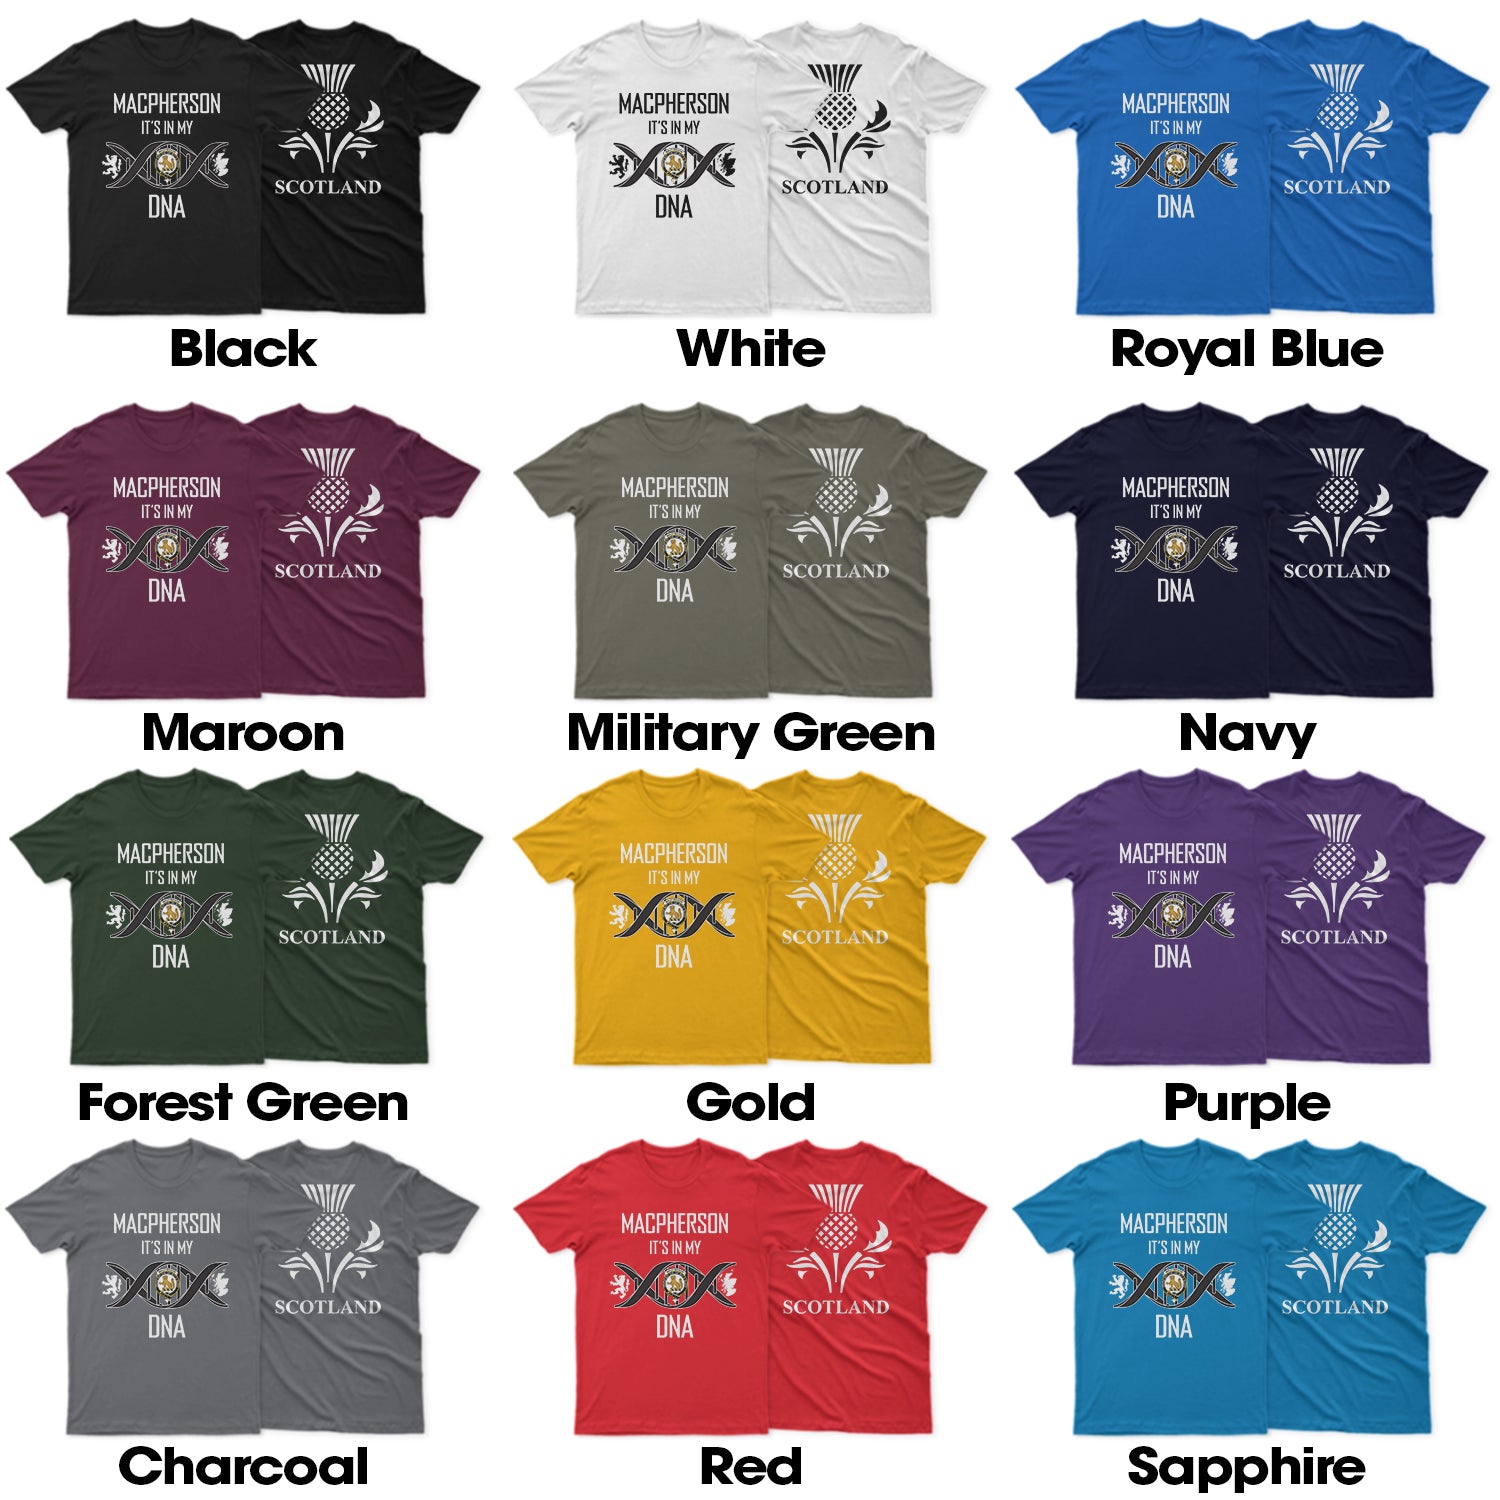 macpherson-family-crest-dna-in-me-mens-t-shirt